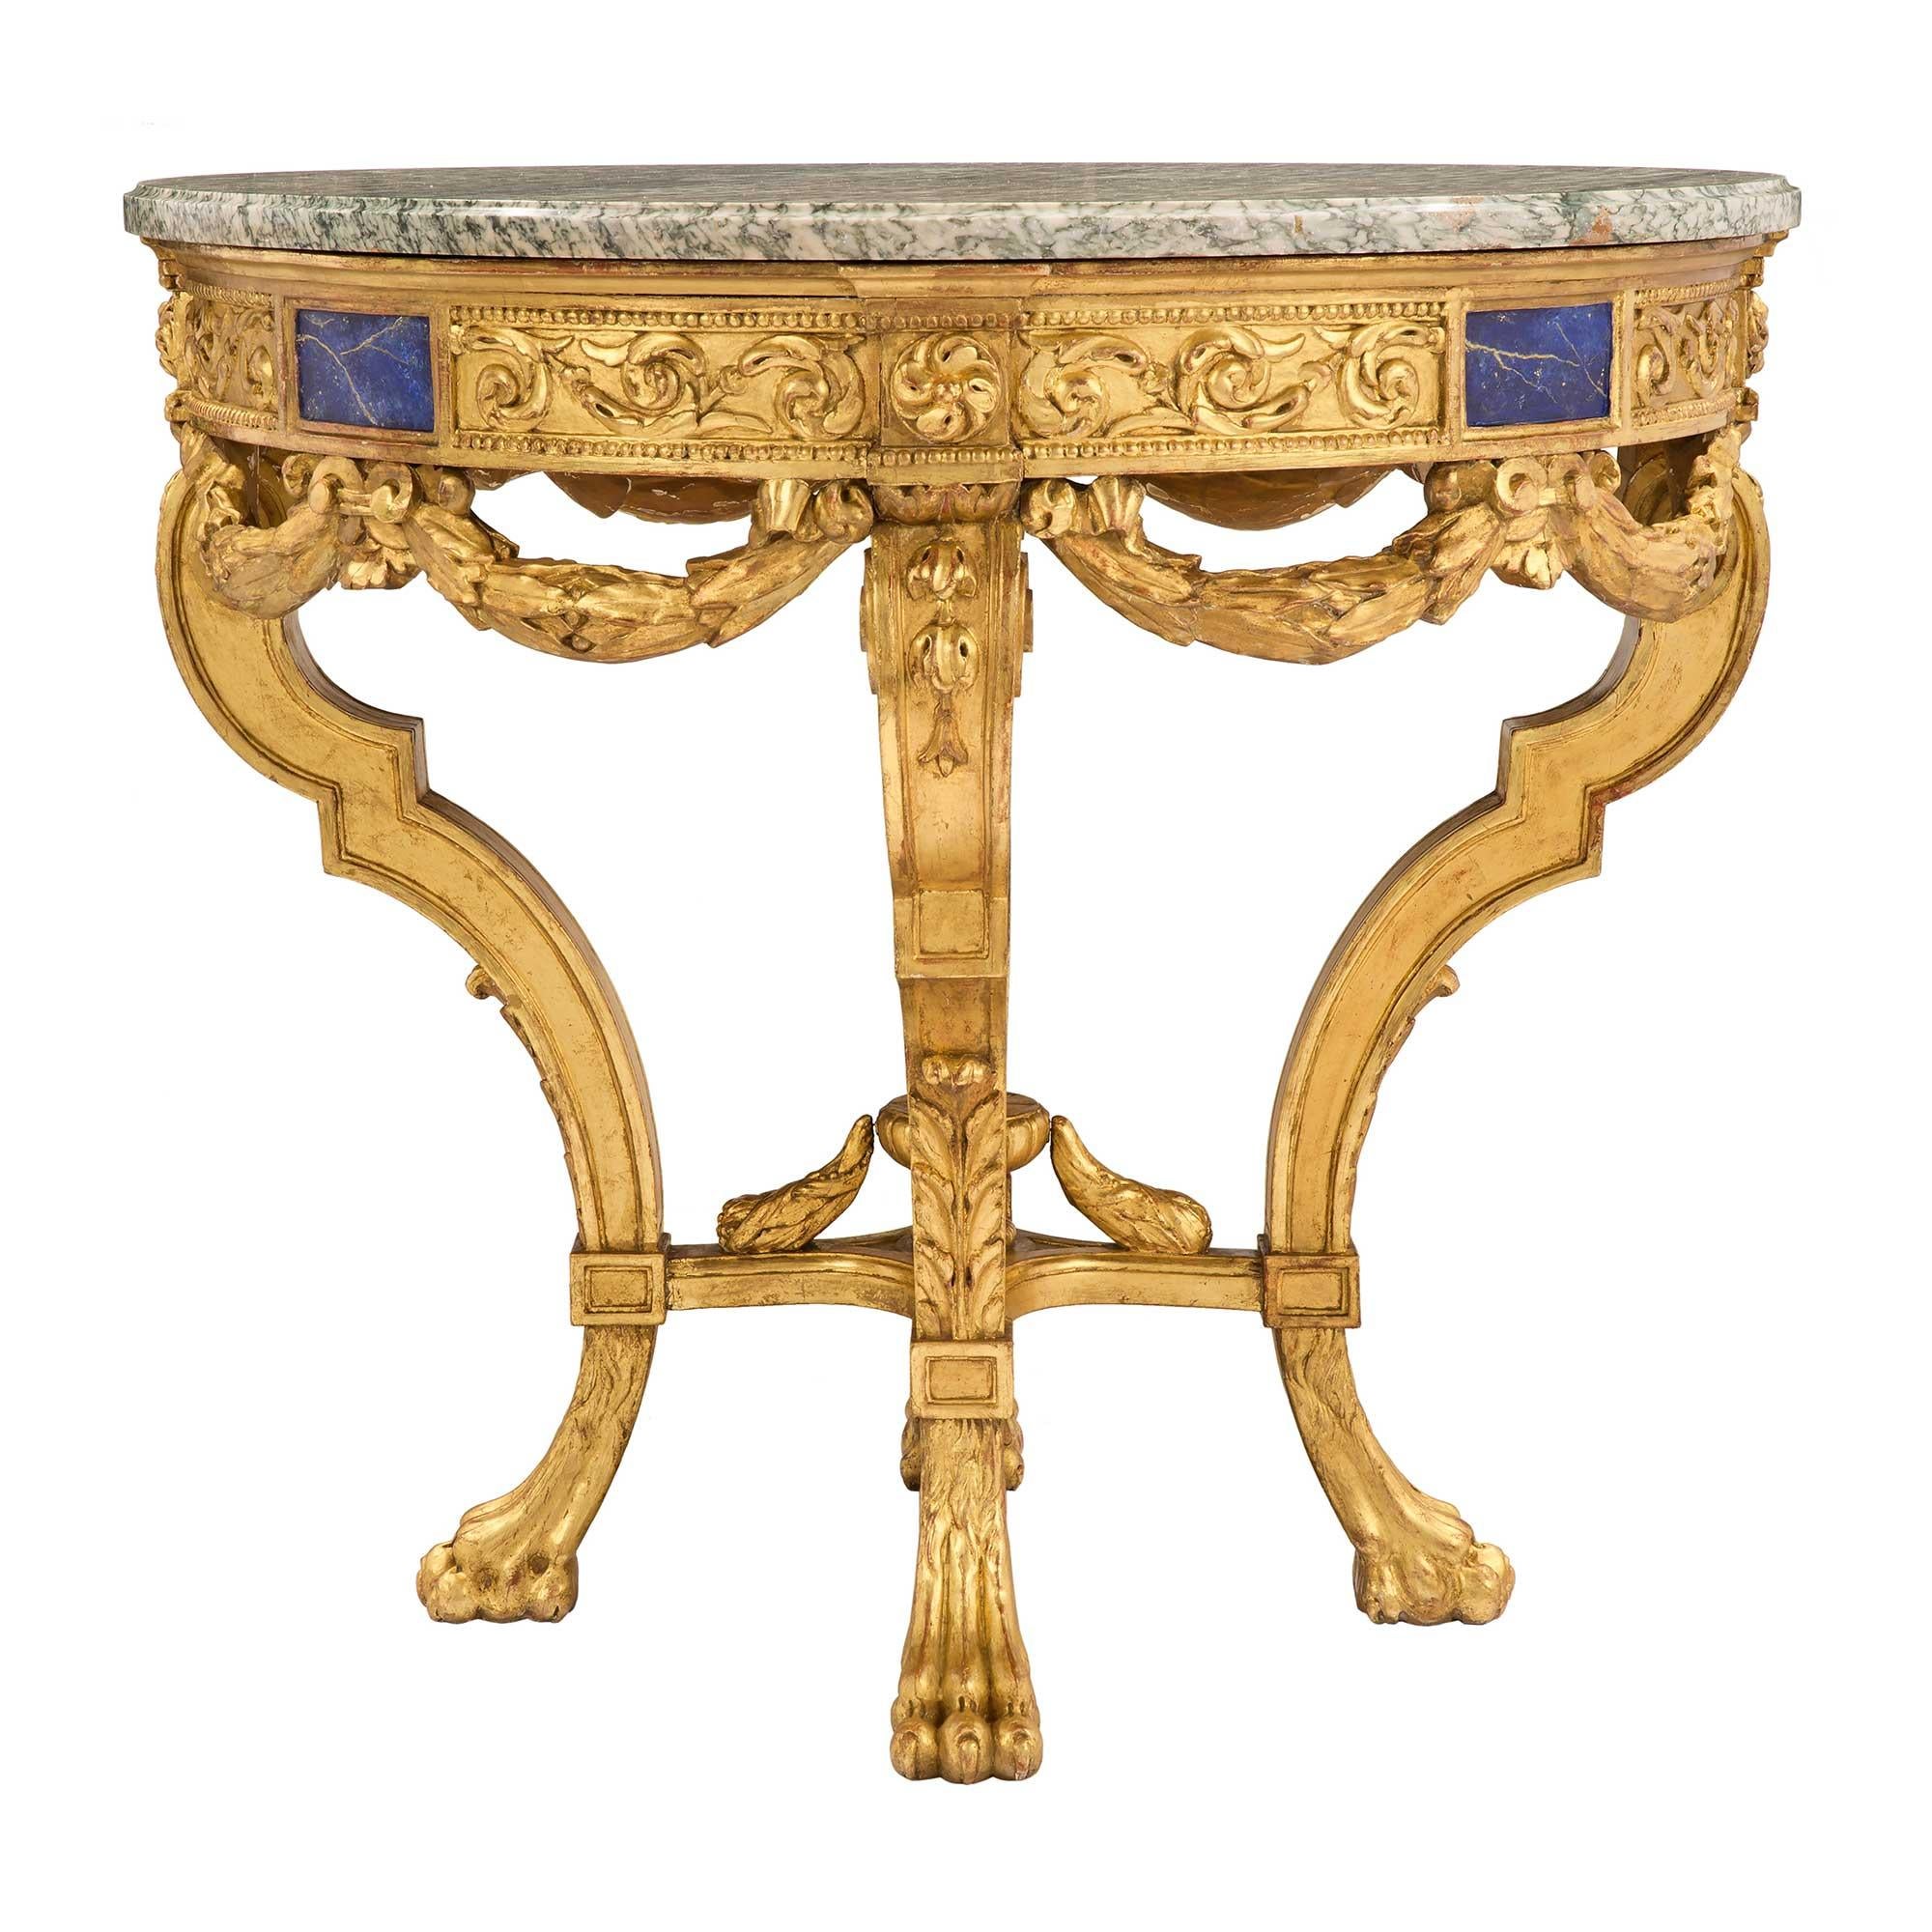 French 19th Century Neoclassical Style Giltwood and Campan Marble Center Table In Good Condition For Sale In West Palm Beach, FL